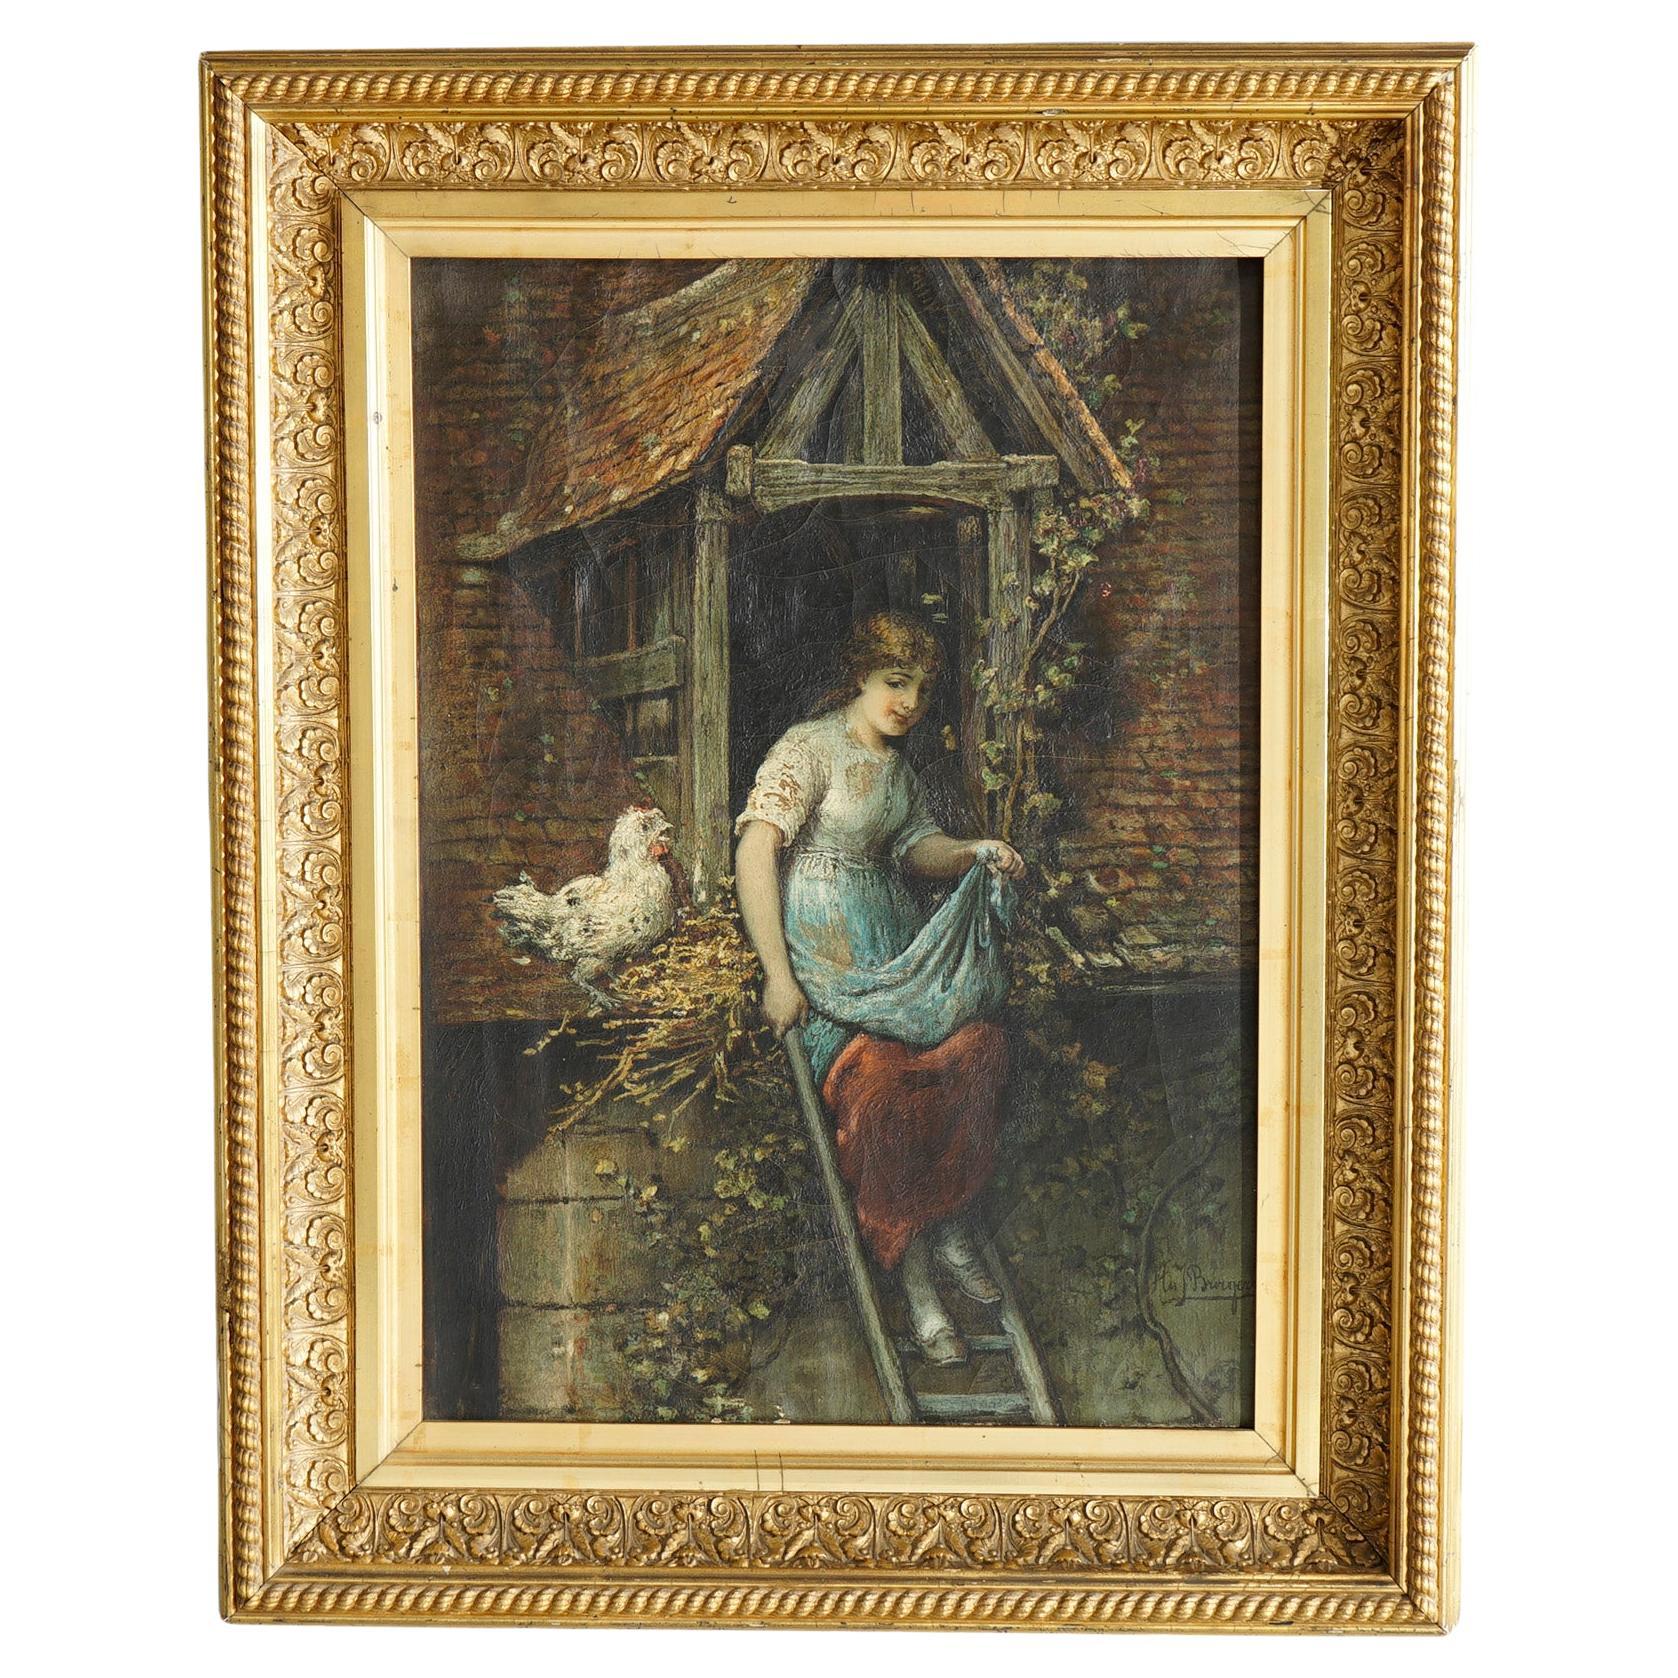 Antique Genre Painting by Bragery, Farm Scene with Girl & Chicken, c1890